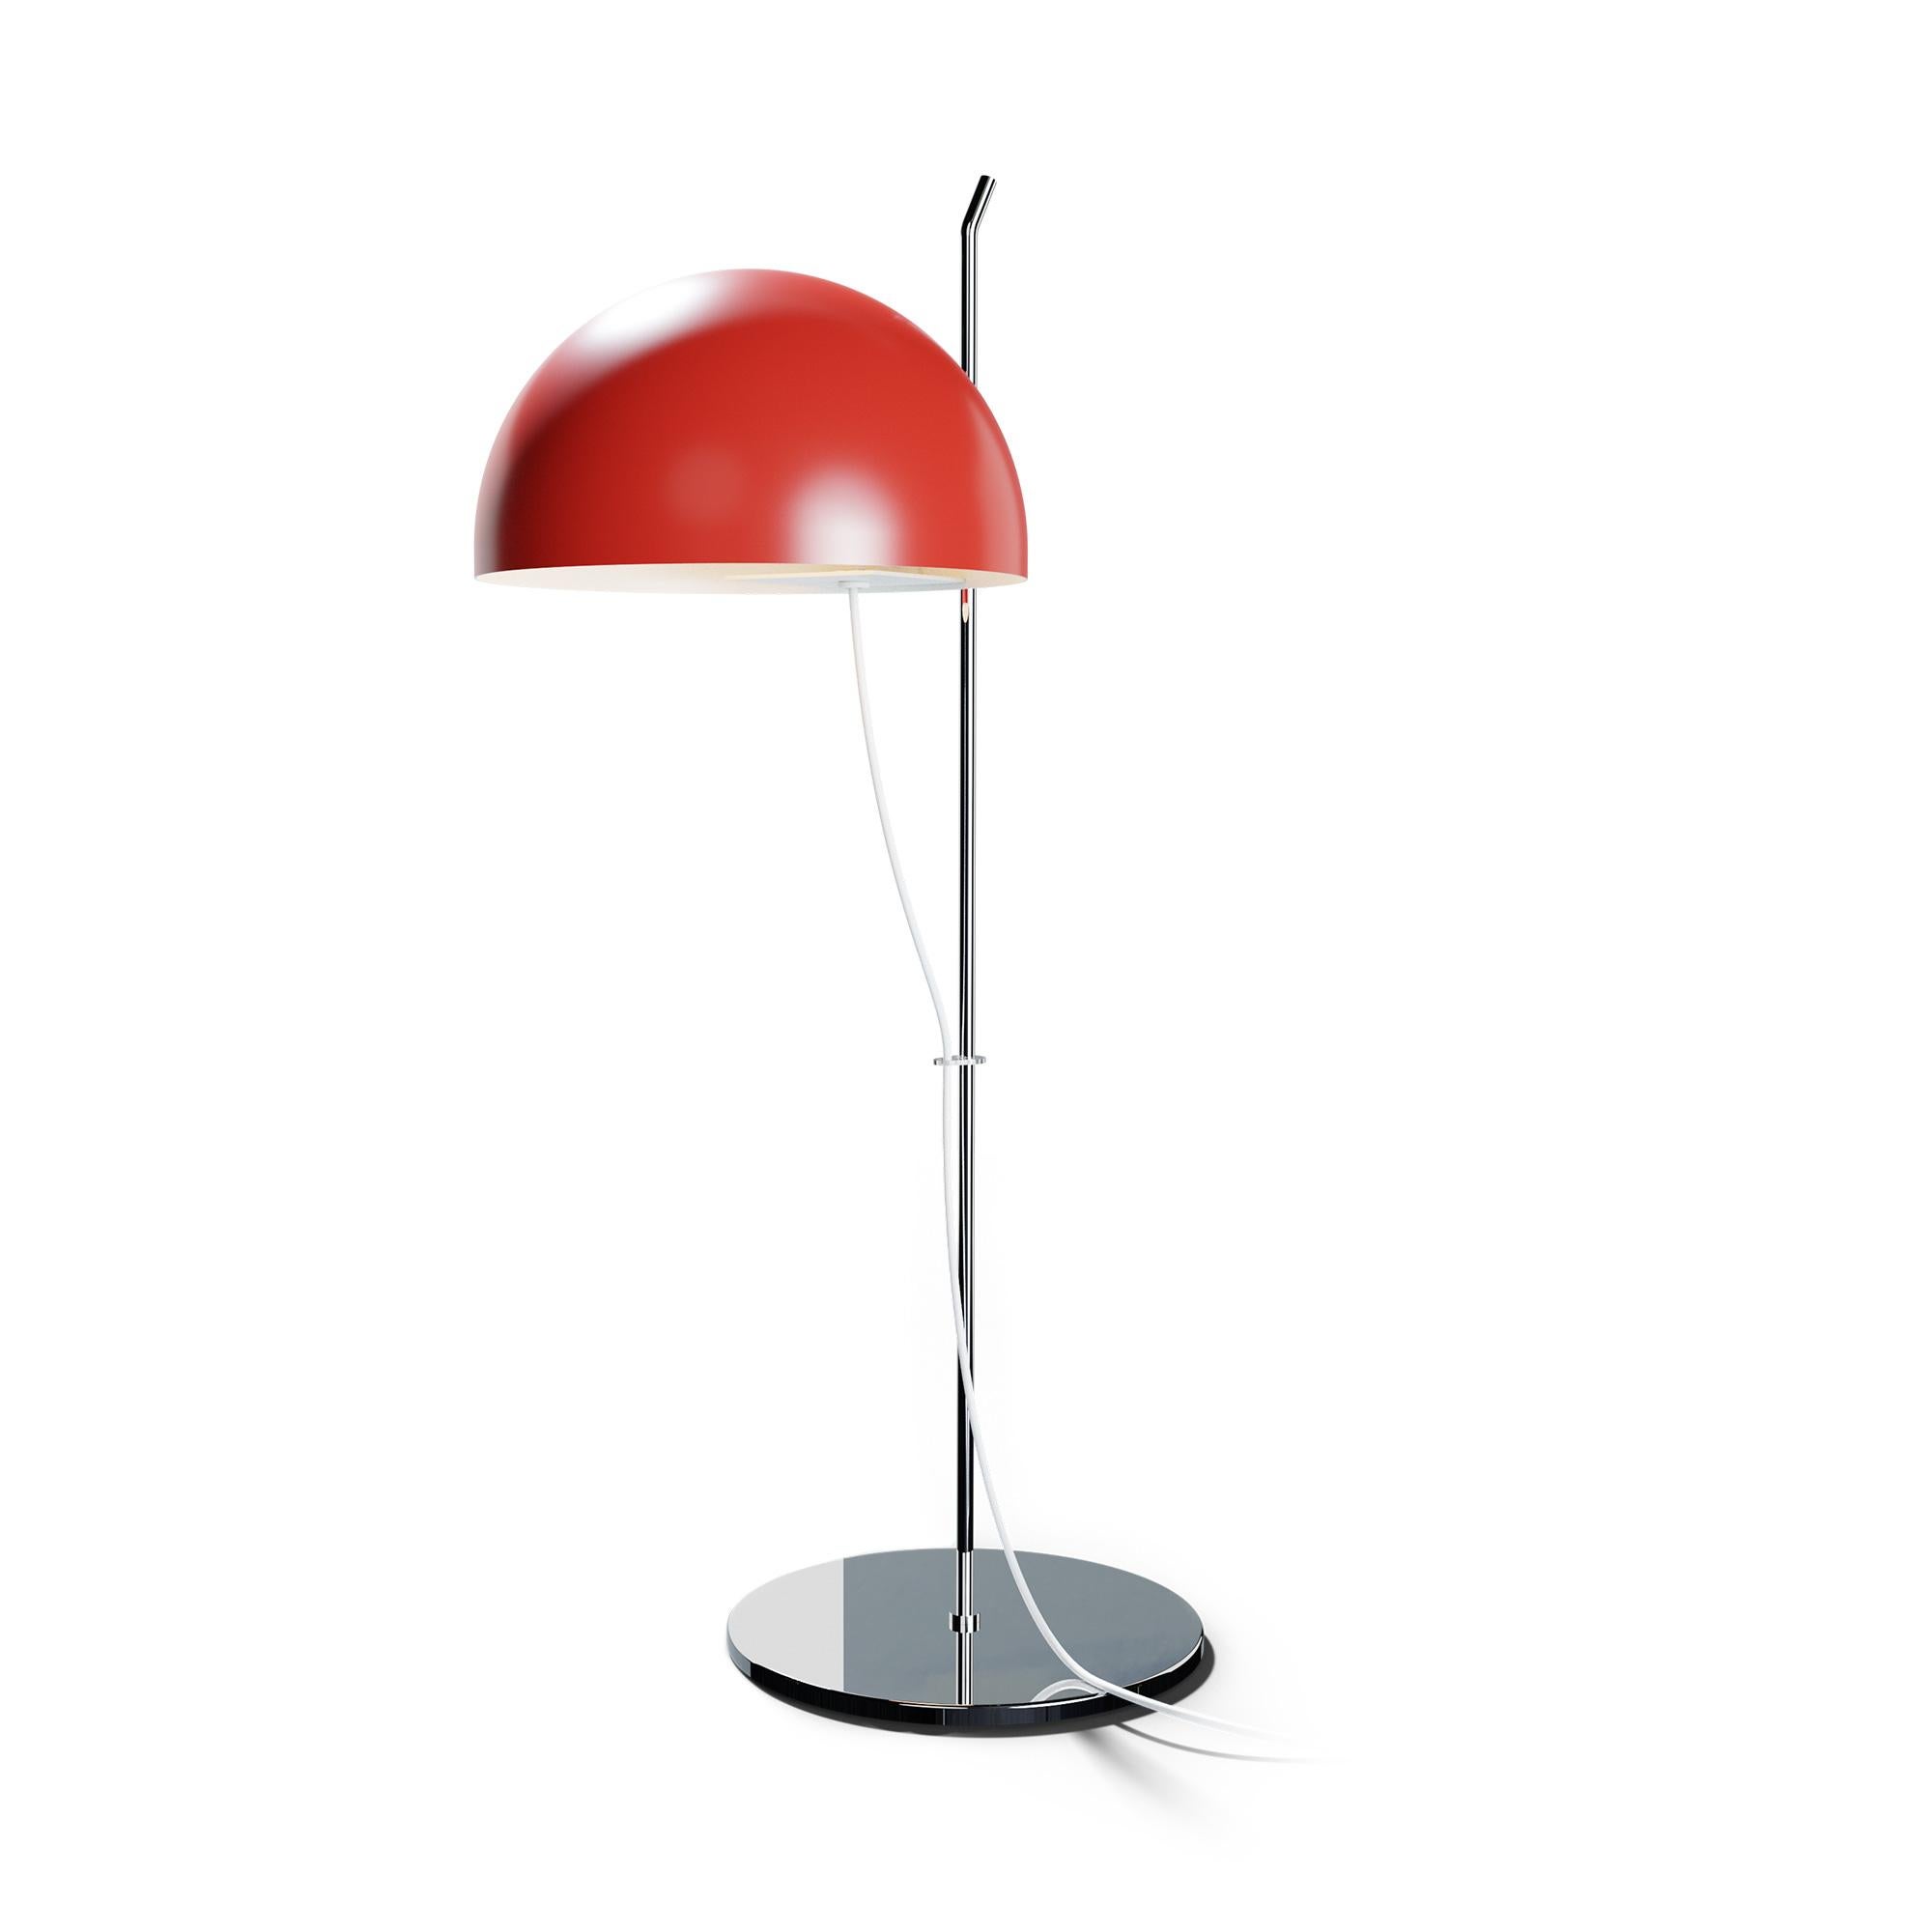 French Alain Richard 'A21' Desk Lamp in Red for Disderot For Sale